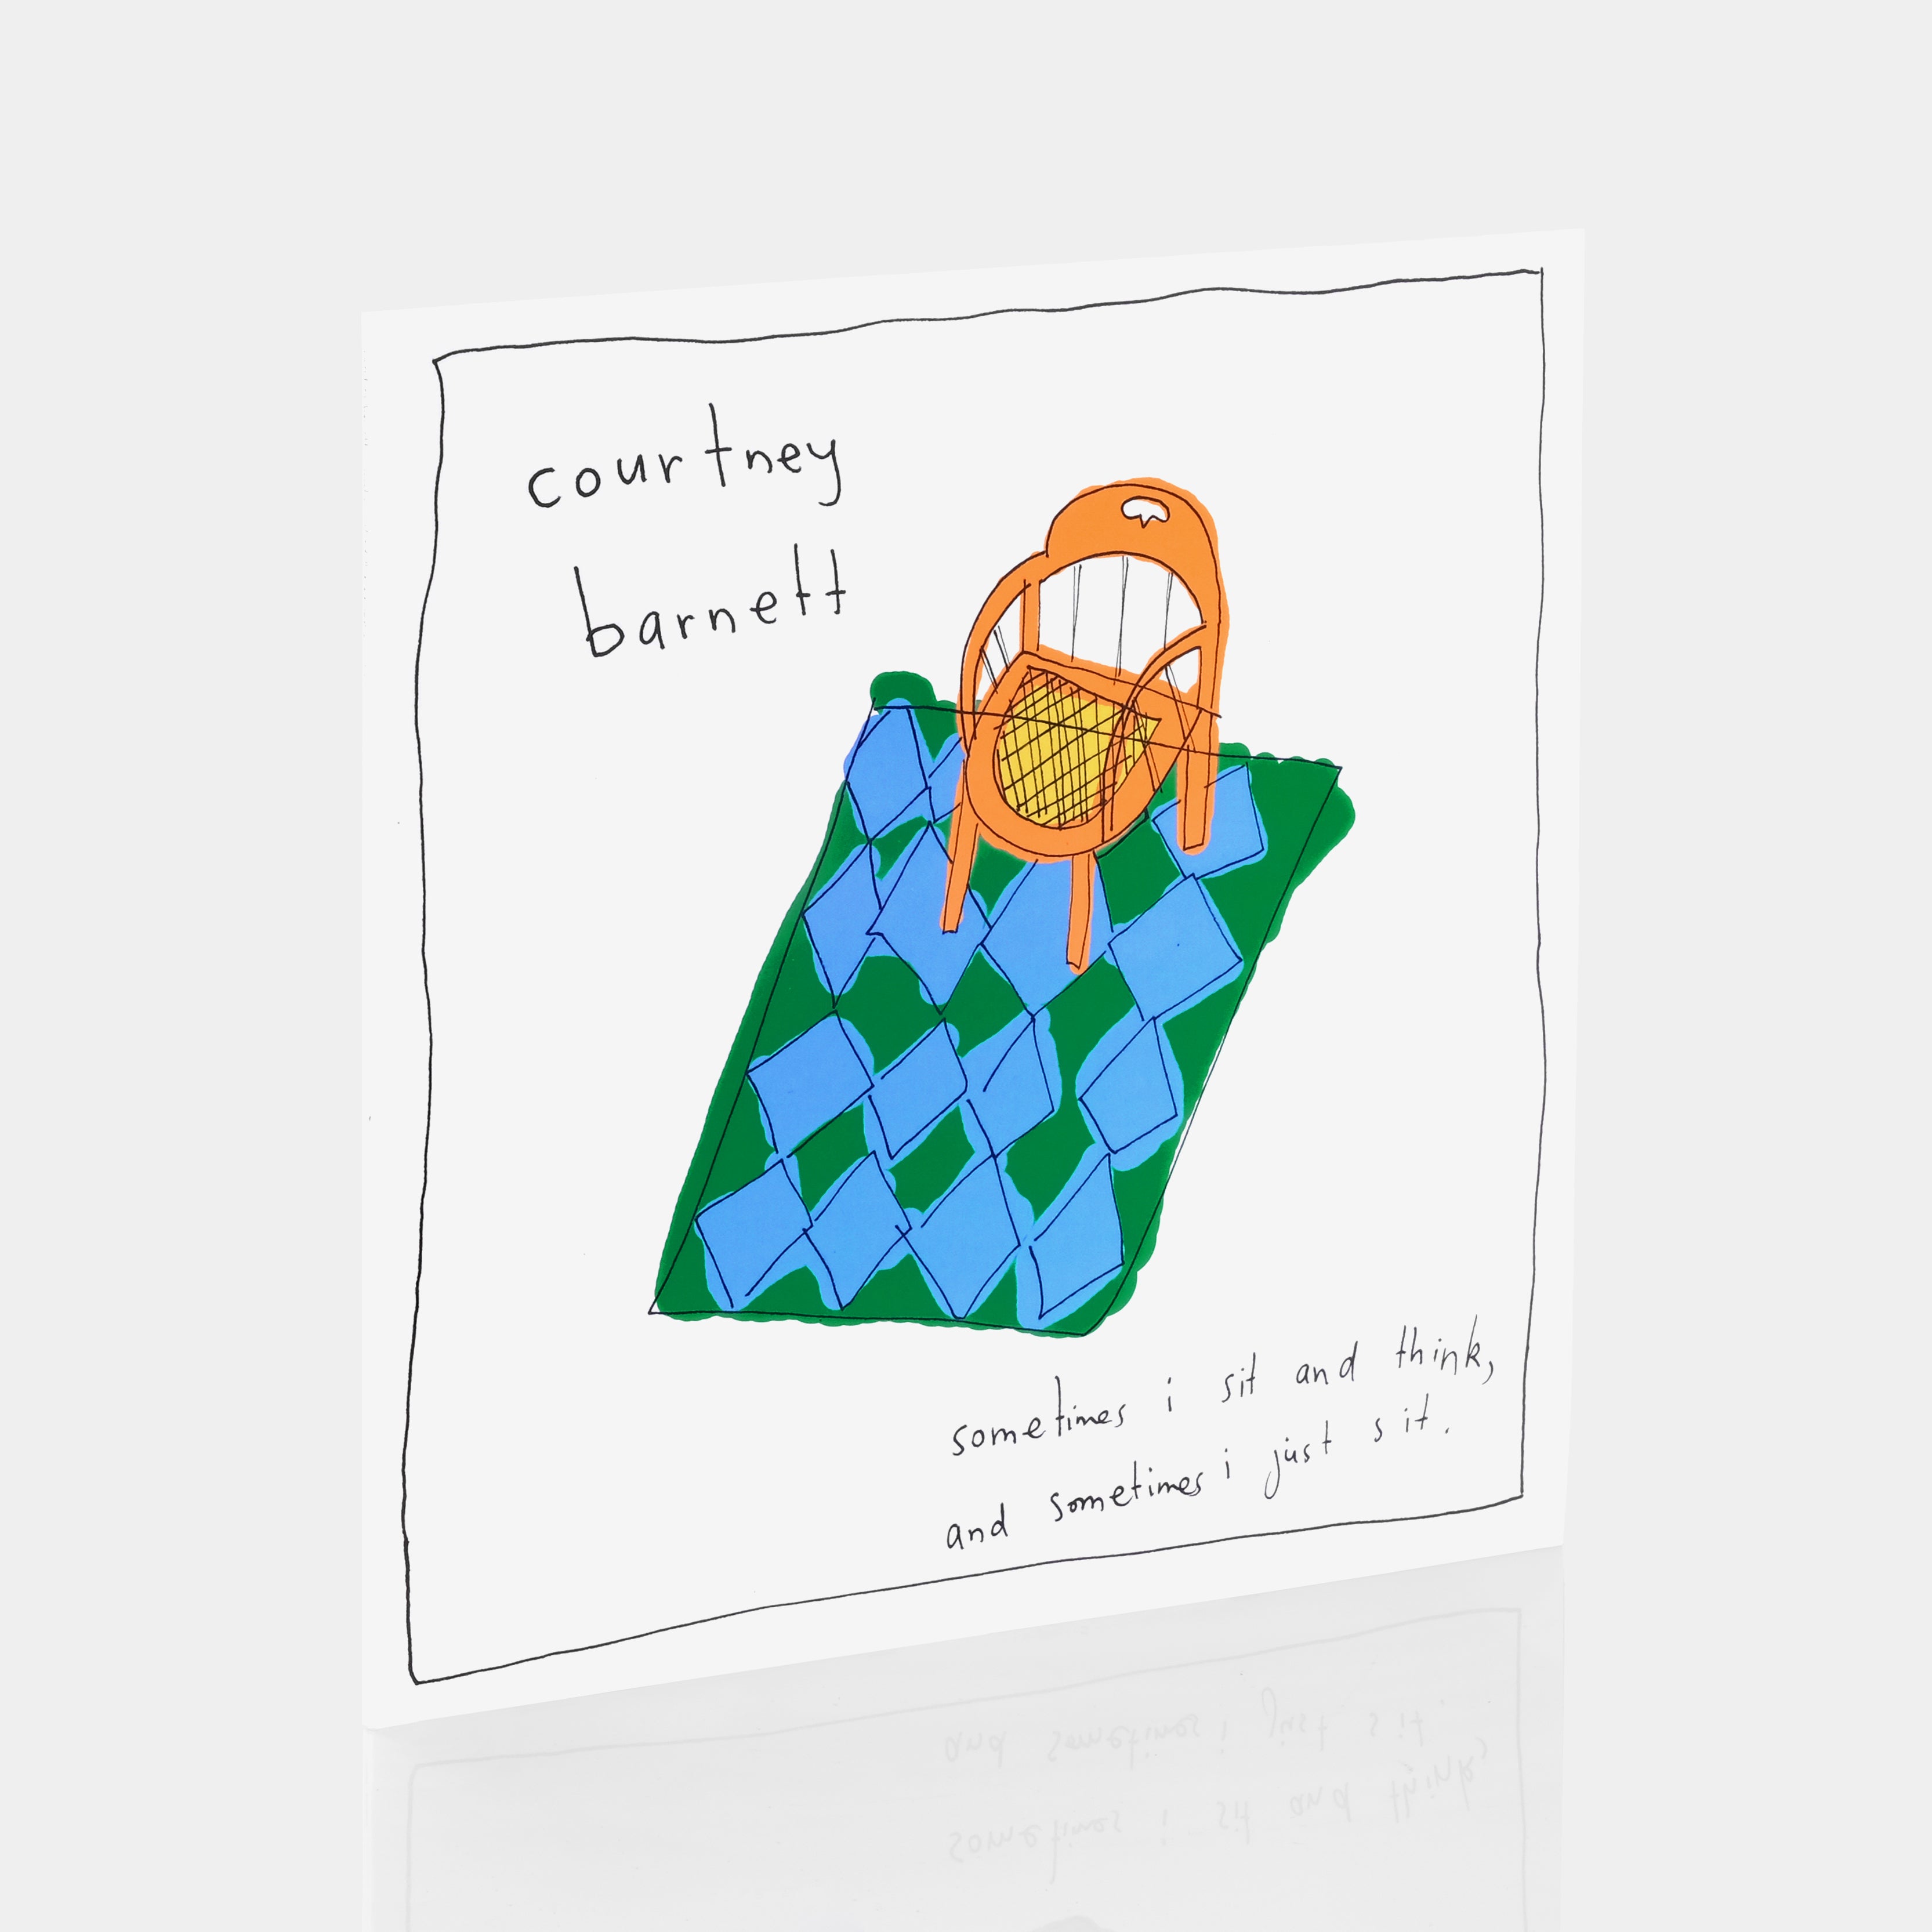 Courtney Barnett - Sometimes I Sit And Think, And Sometimes I Just Sit LP Vinyl Record